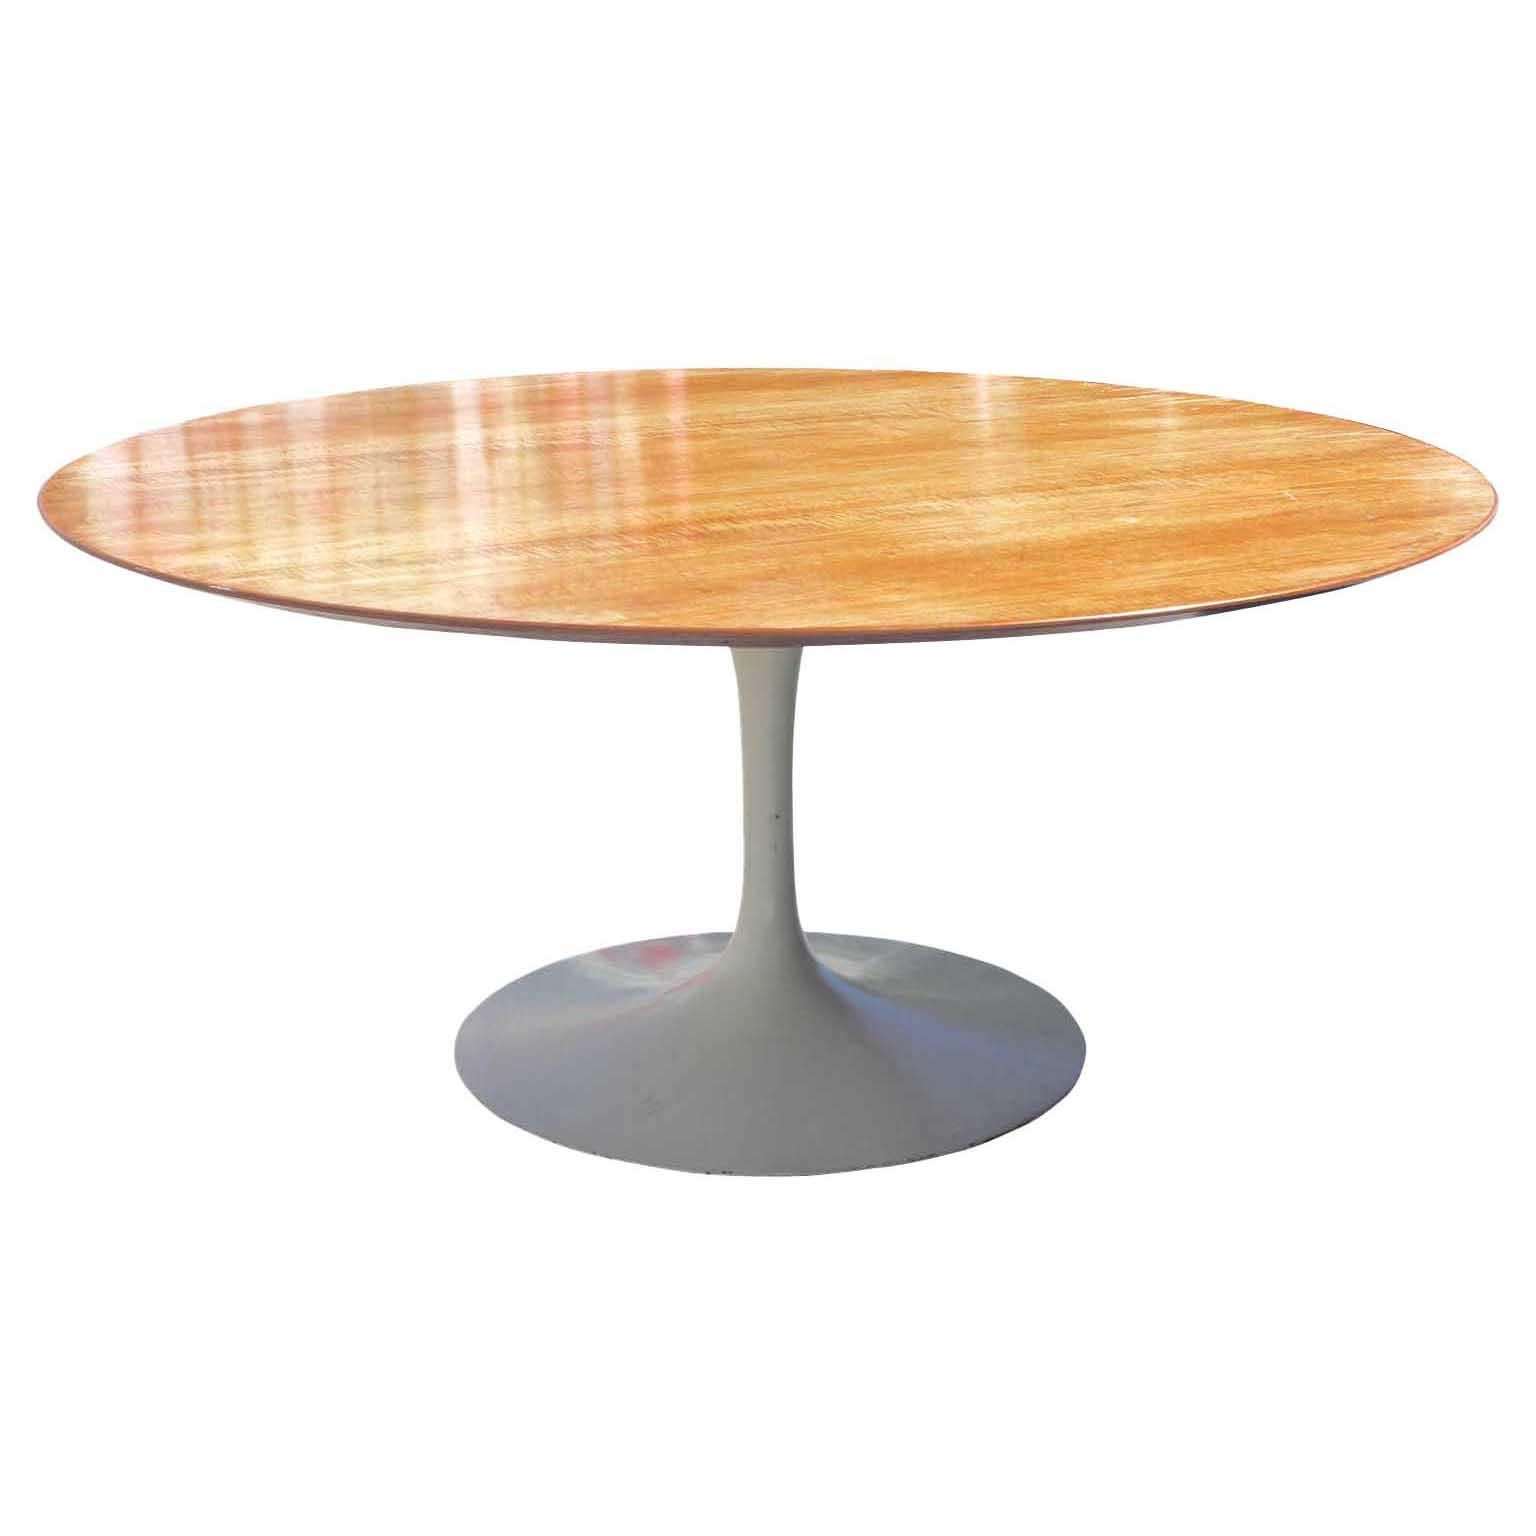 Rare Midcentury Round Tulip Table with Wooden Top by Knoll and Saarinen